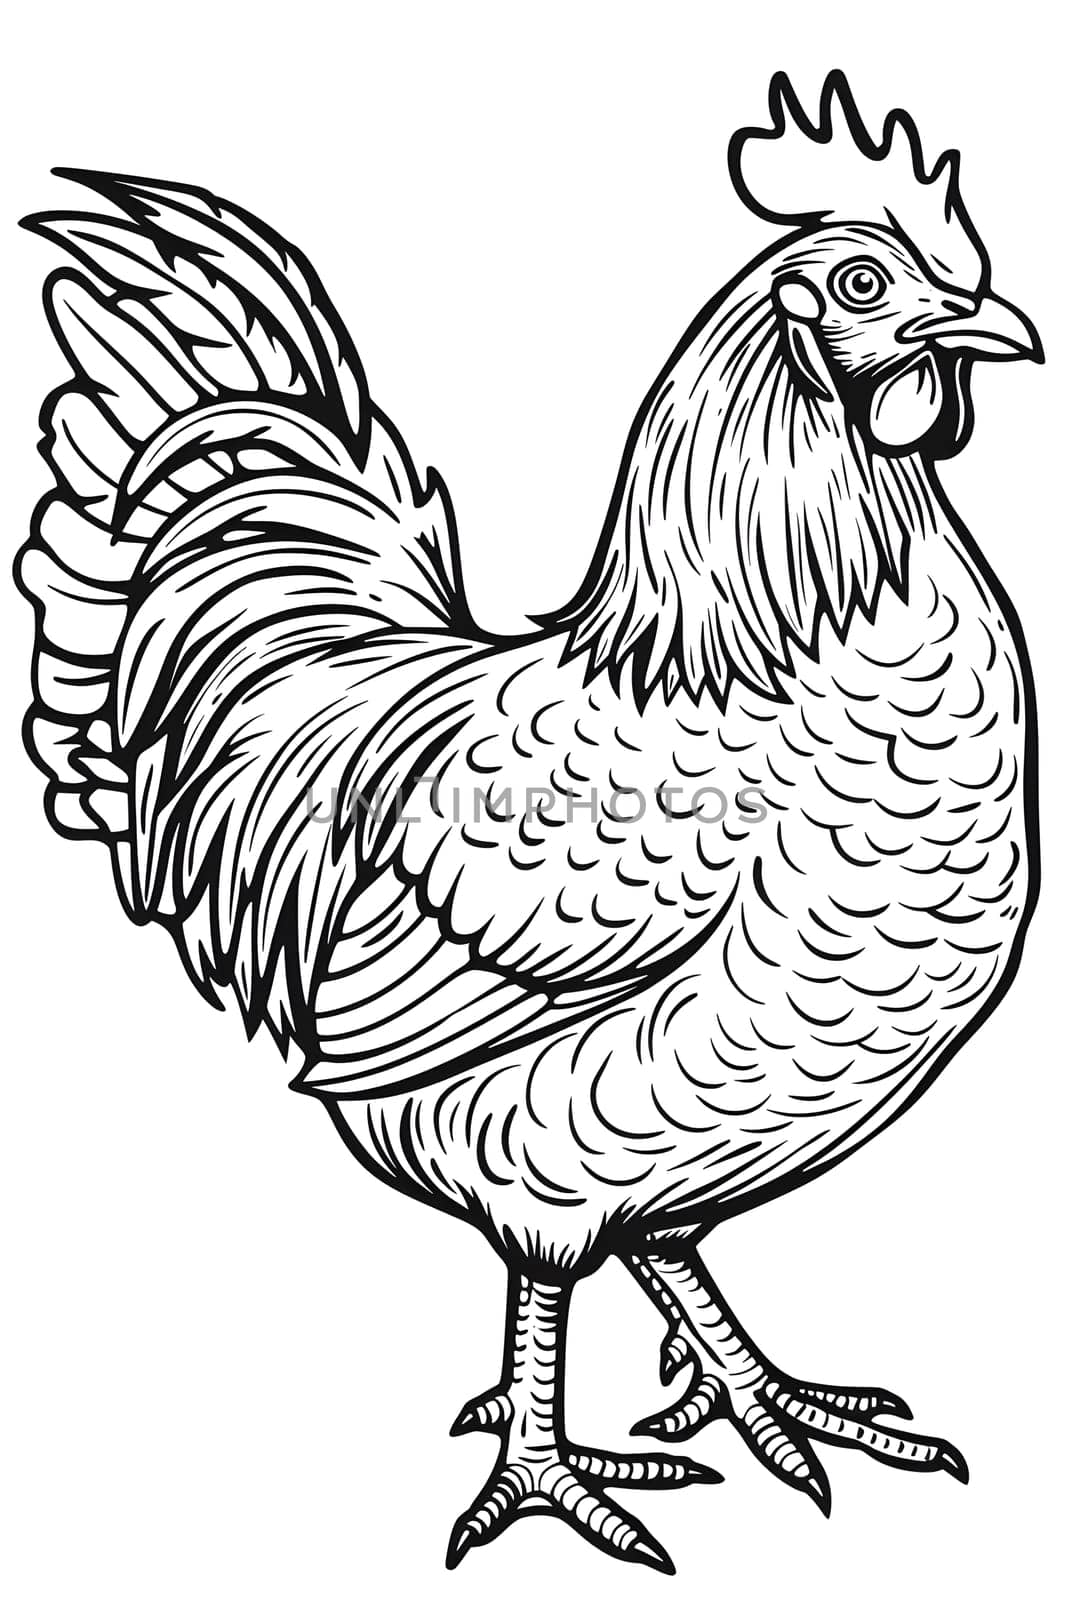 A monochromatic illustration of a crowned rooster, a bird from the Phasianidae family of Galliformes. Its distinctive comb, beak, and adaptions for poultry breeding are evident in the drawing